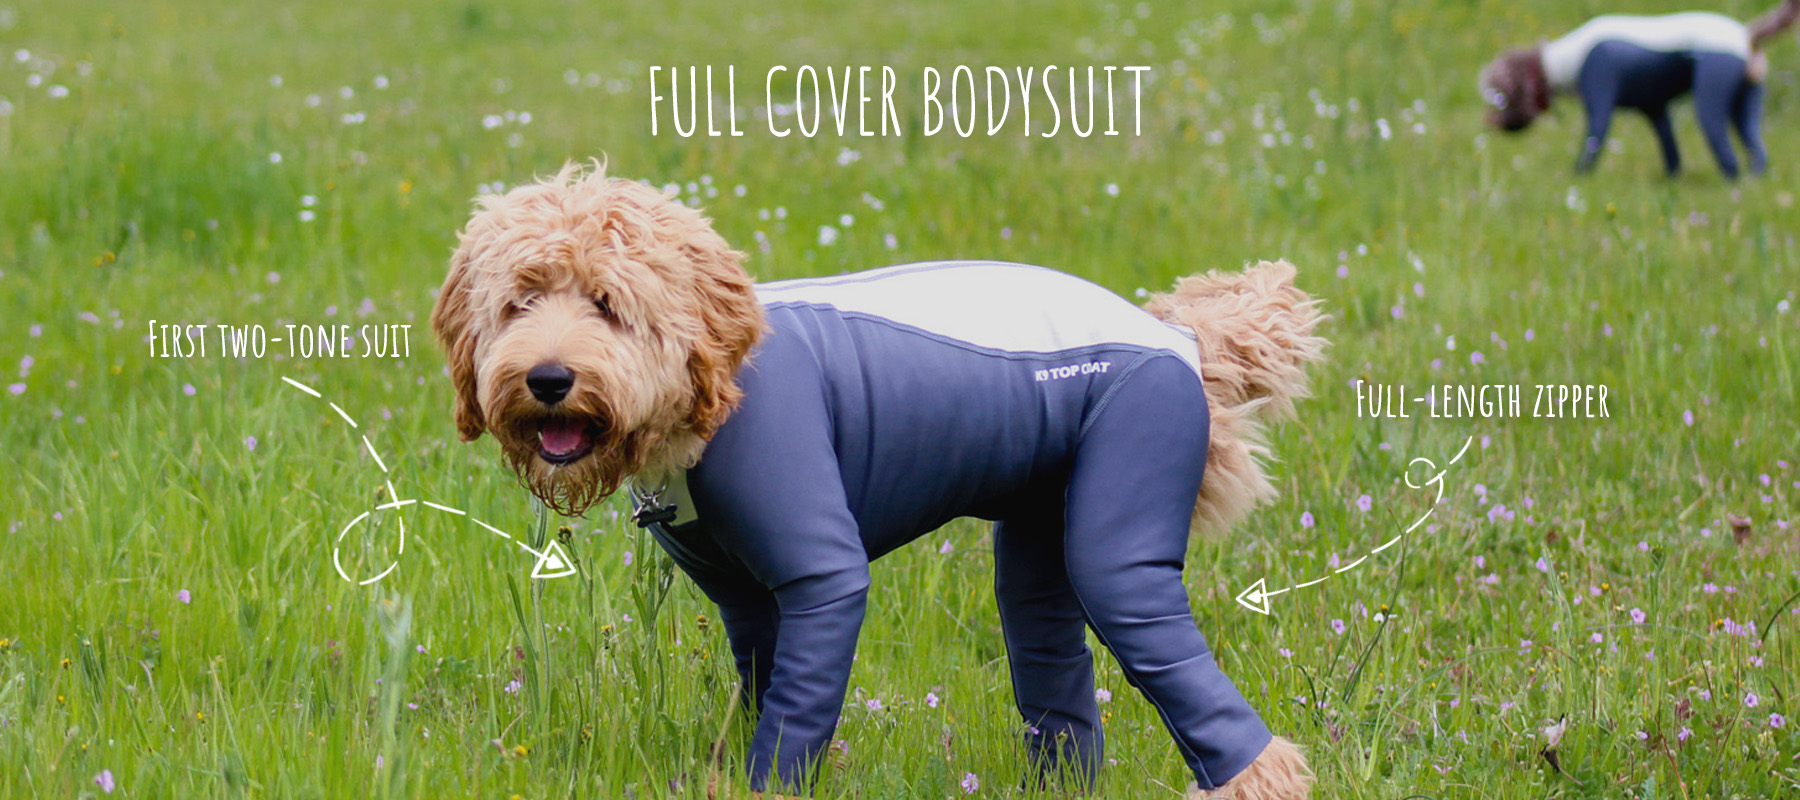 Bodysuit for Large Dogs UV Protection LovinPet Bodysuit for Dogs Easy Wearing 4 Leg Dog Bodysuit Dog Jammies Lightweight Stretchy After The Rain Butterfly Leaves Cerulean Prints Dog Jumpsuit 